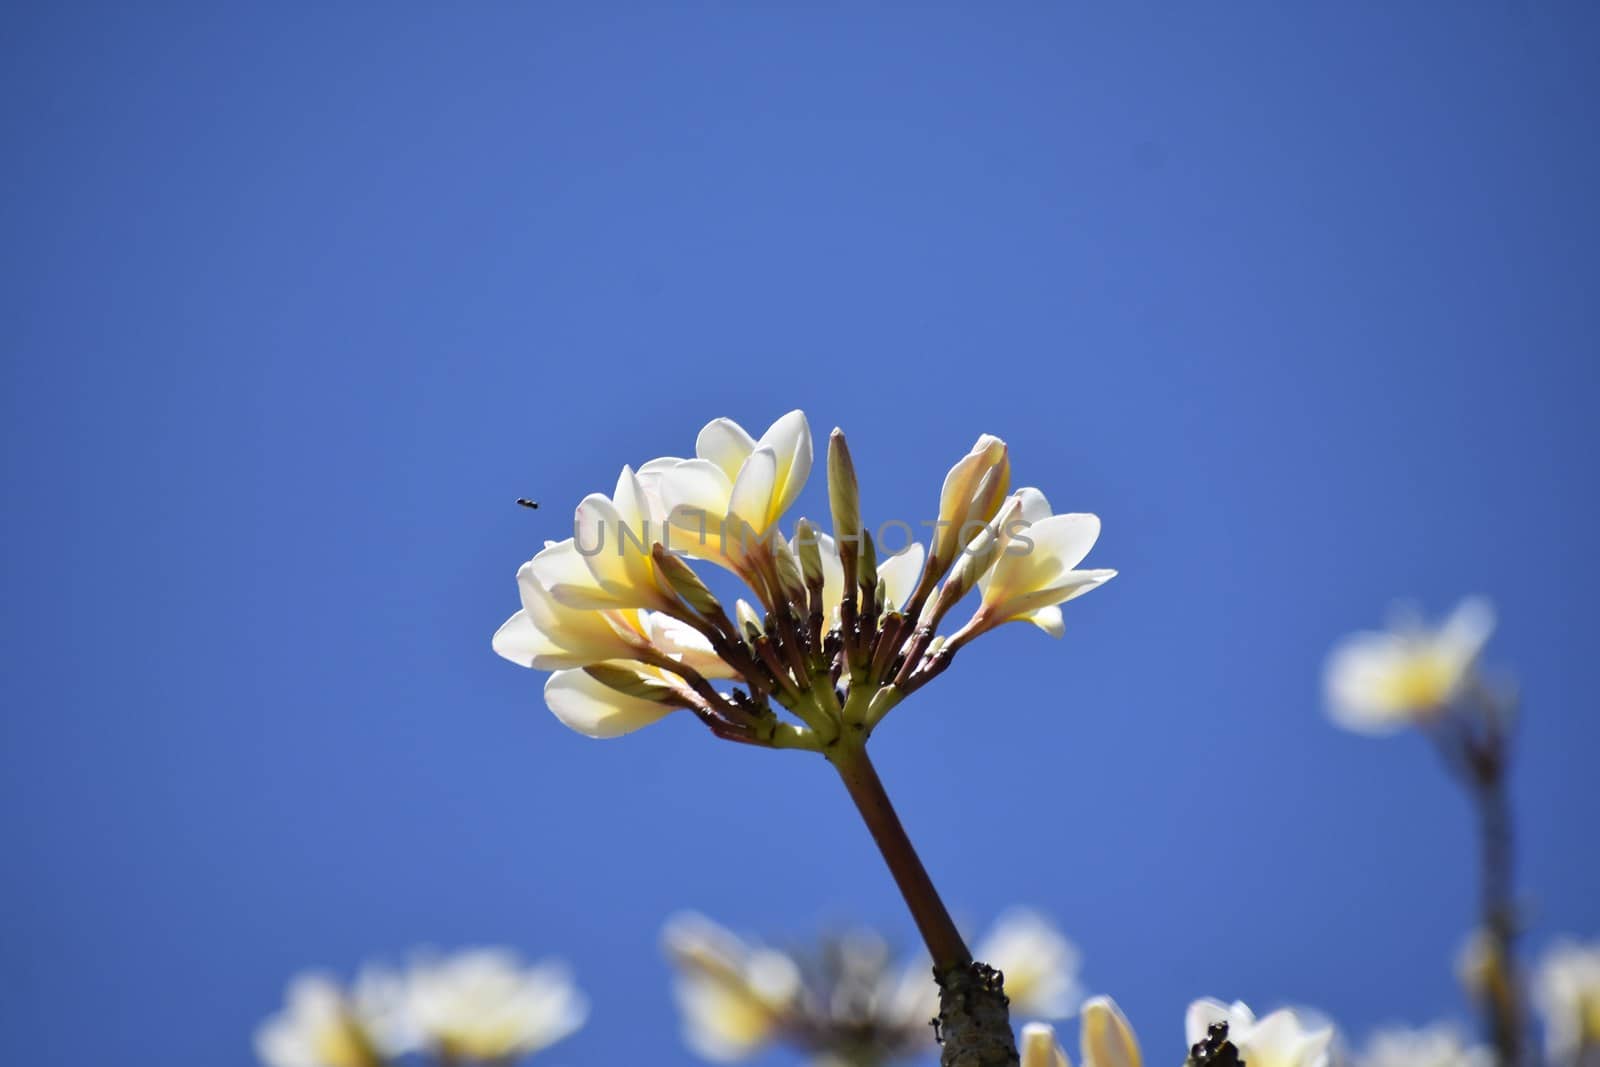 Bunch of white flowers against blue sky by ravindrabhu165165@gmail.com